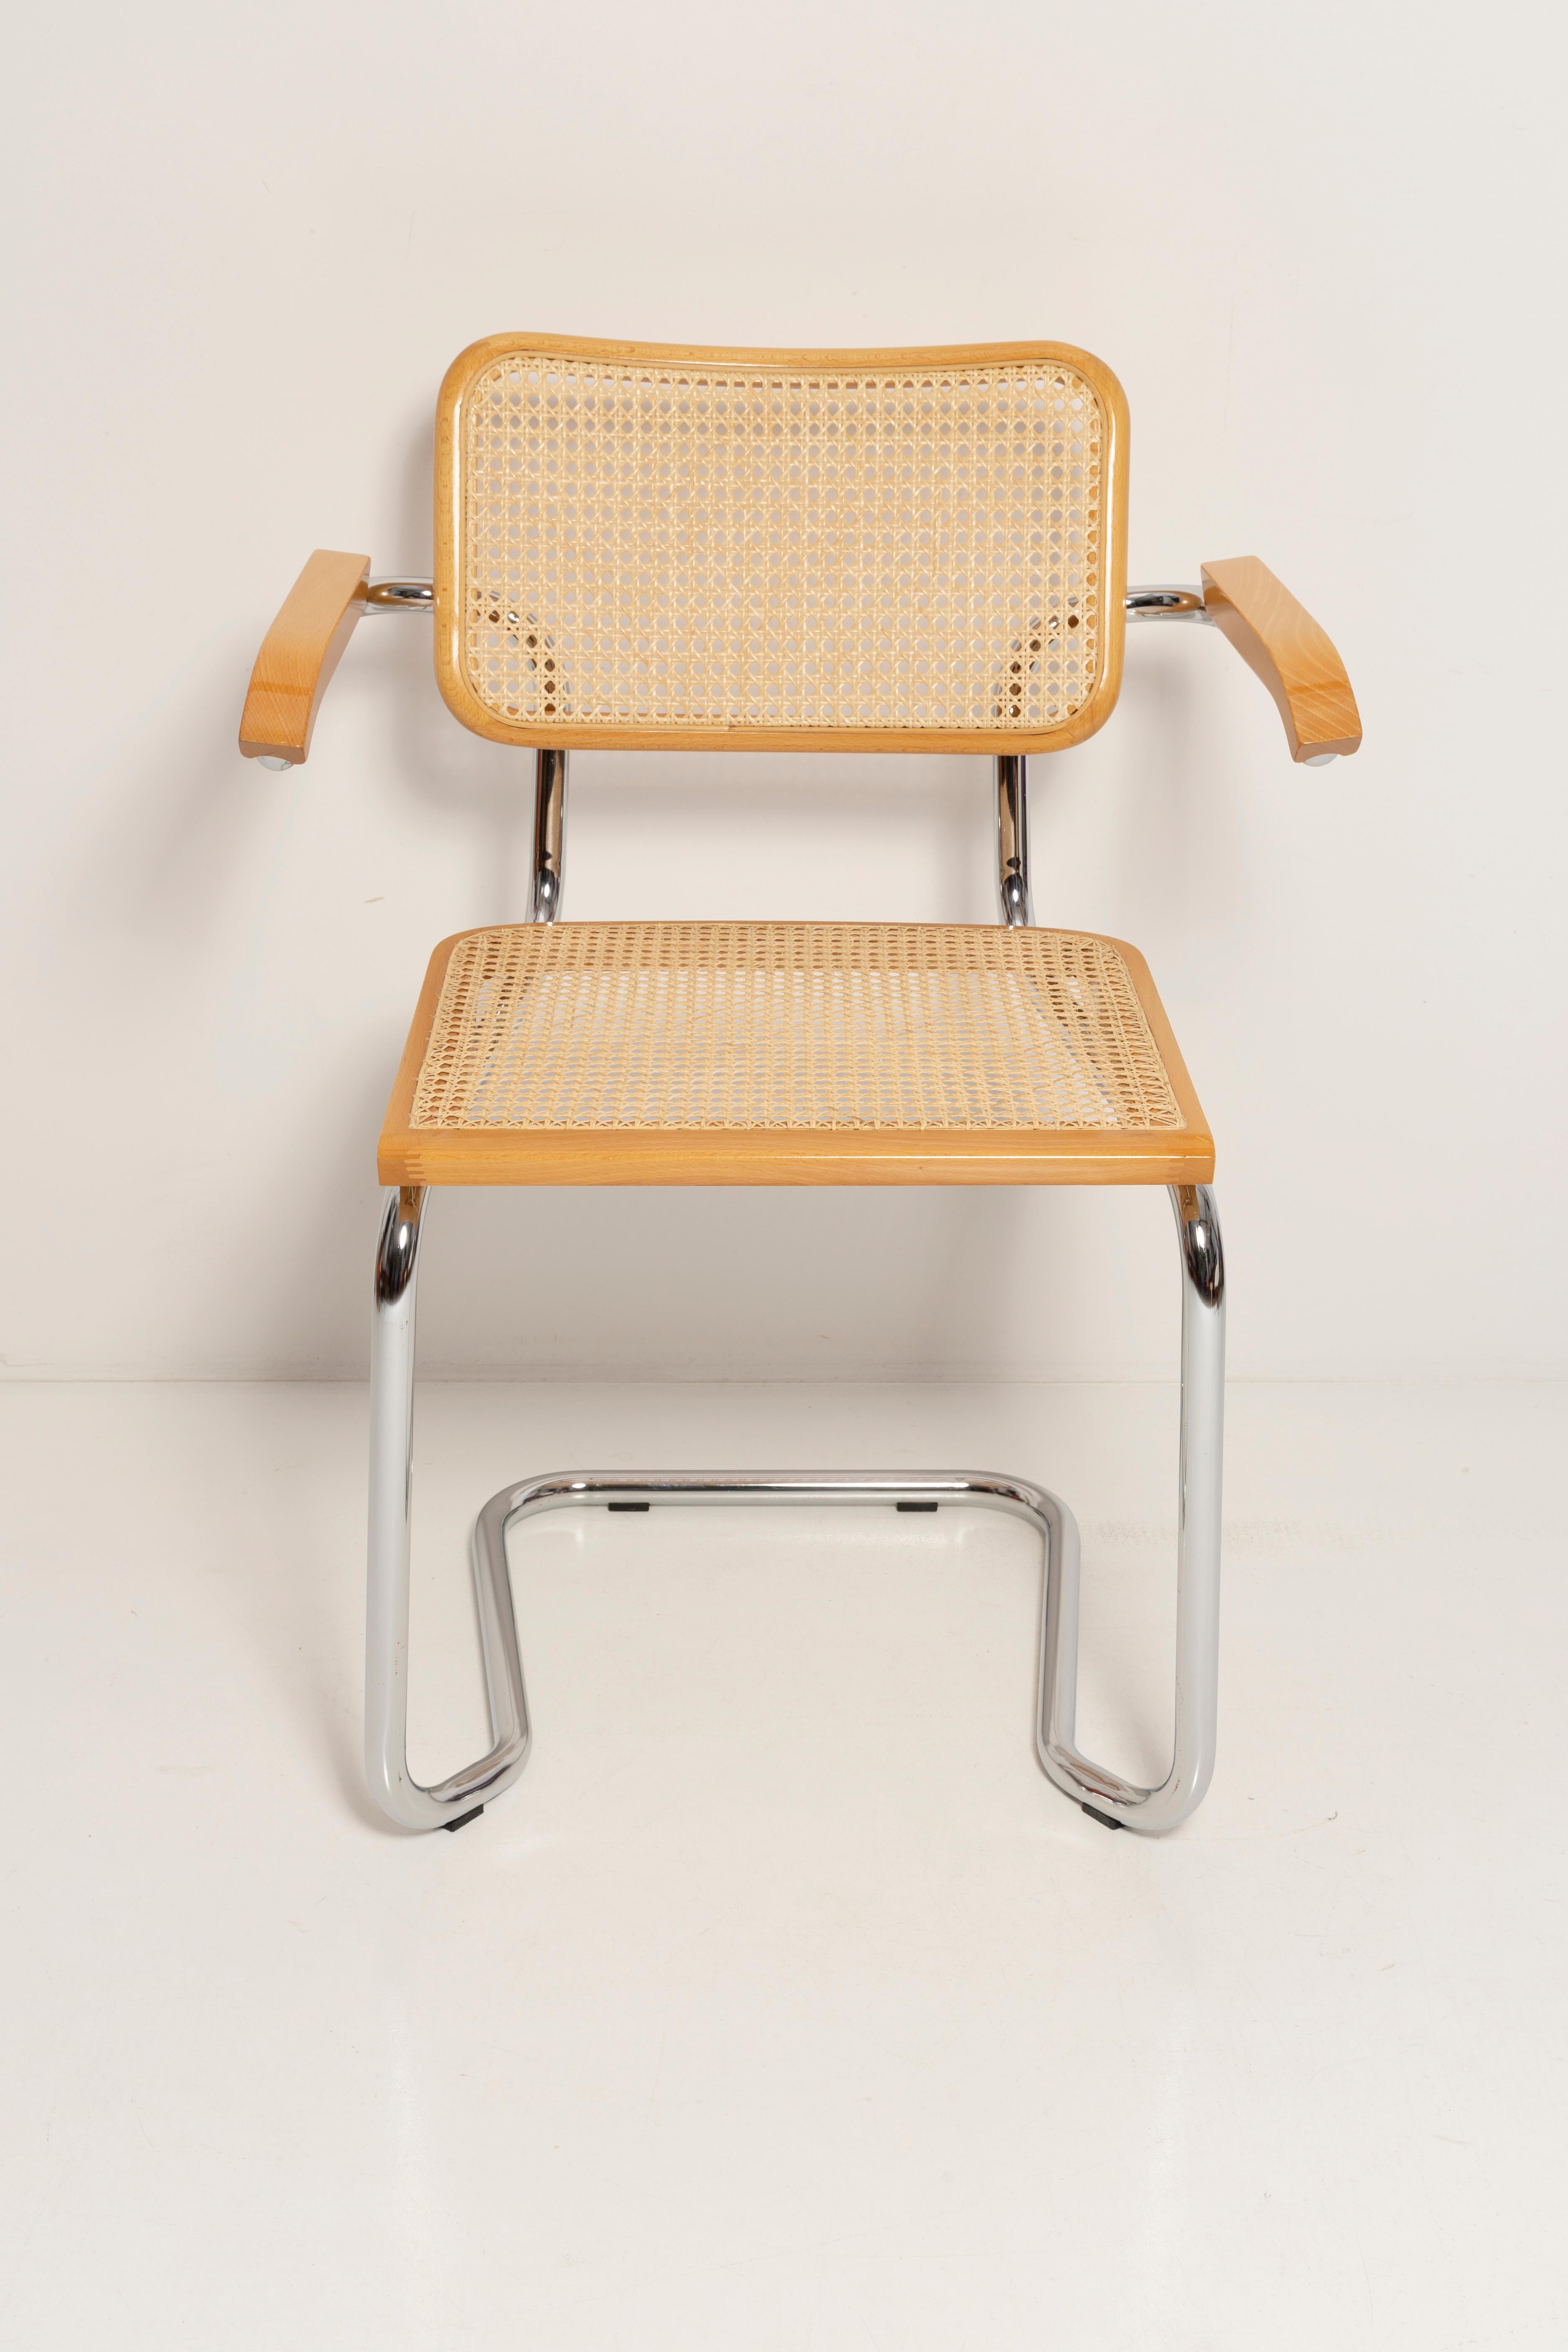 Set of Four Midcentury Cesca Rattan Chairs, Marcel Breuer, Italy, 1960s For Sale 2